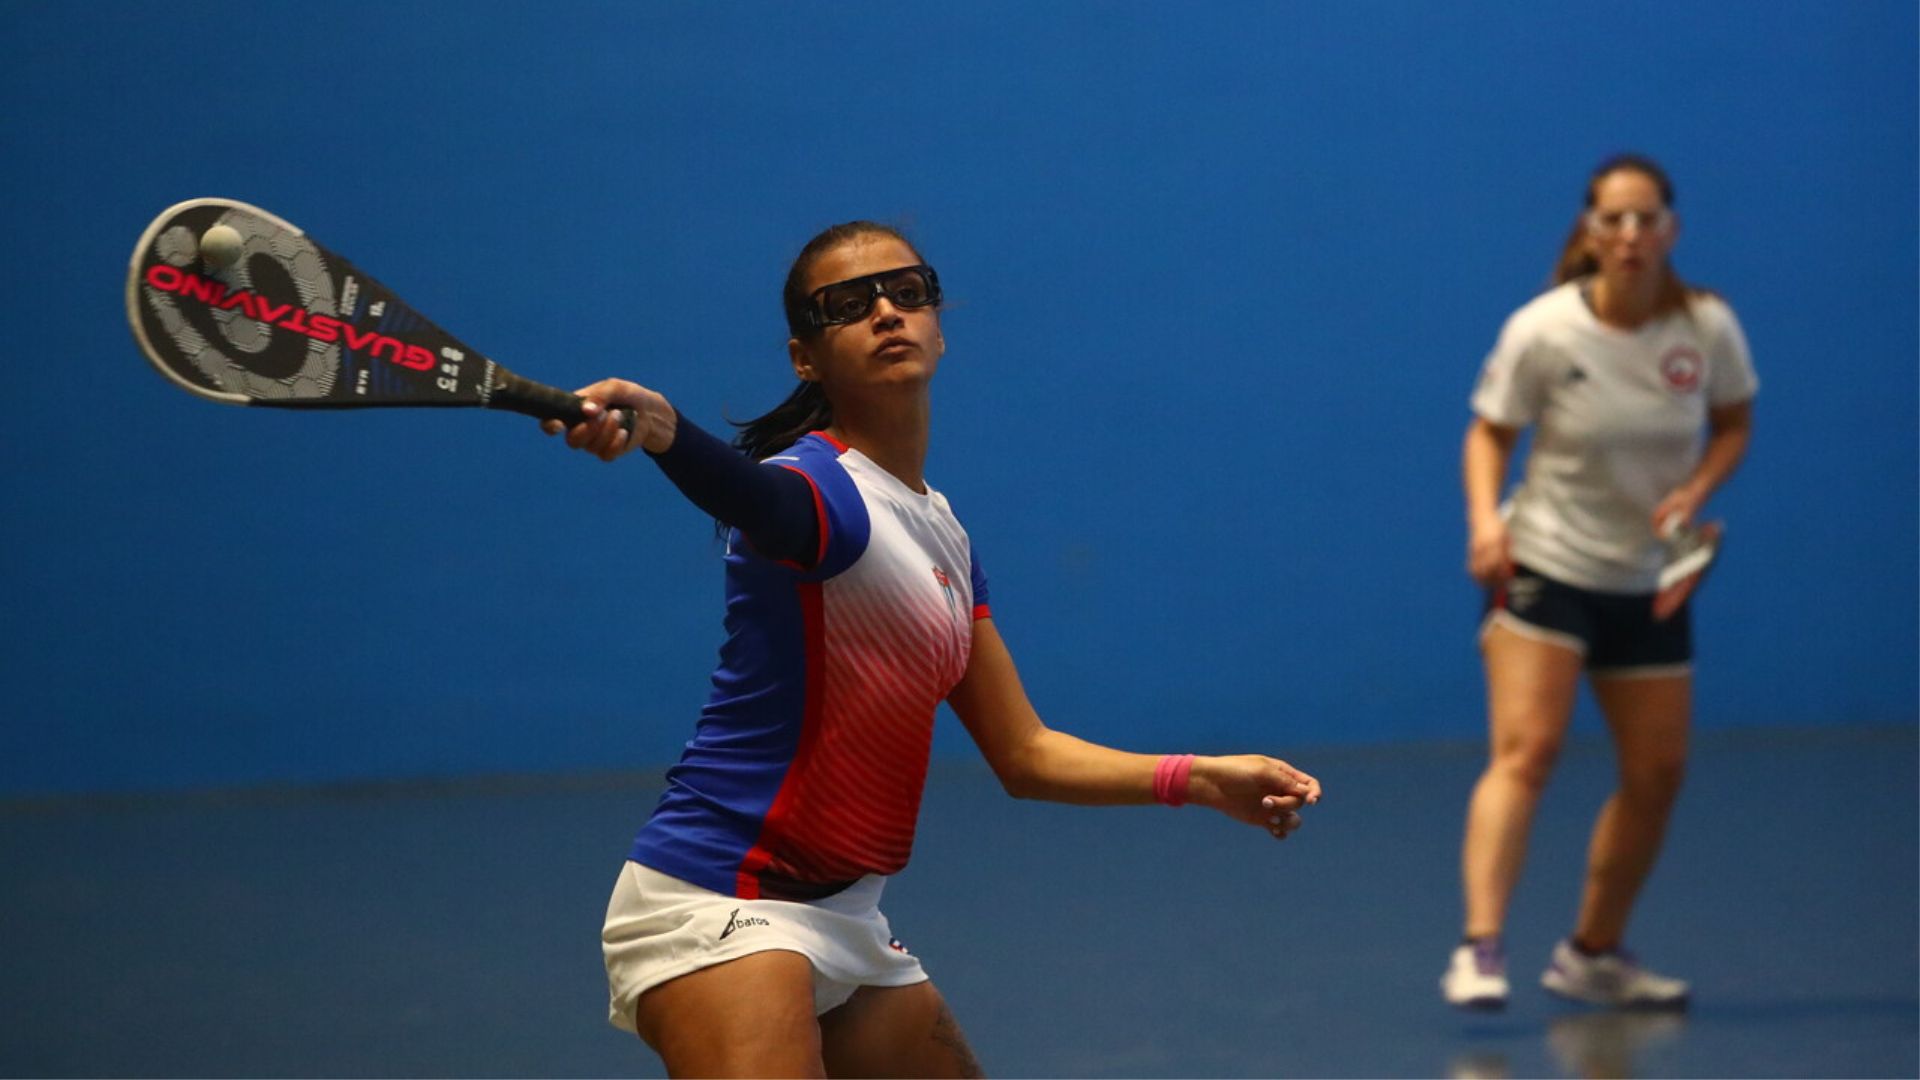 Mexico Secures Silver in Male's and Female's Frontball Basque Pelota